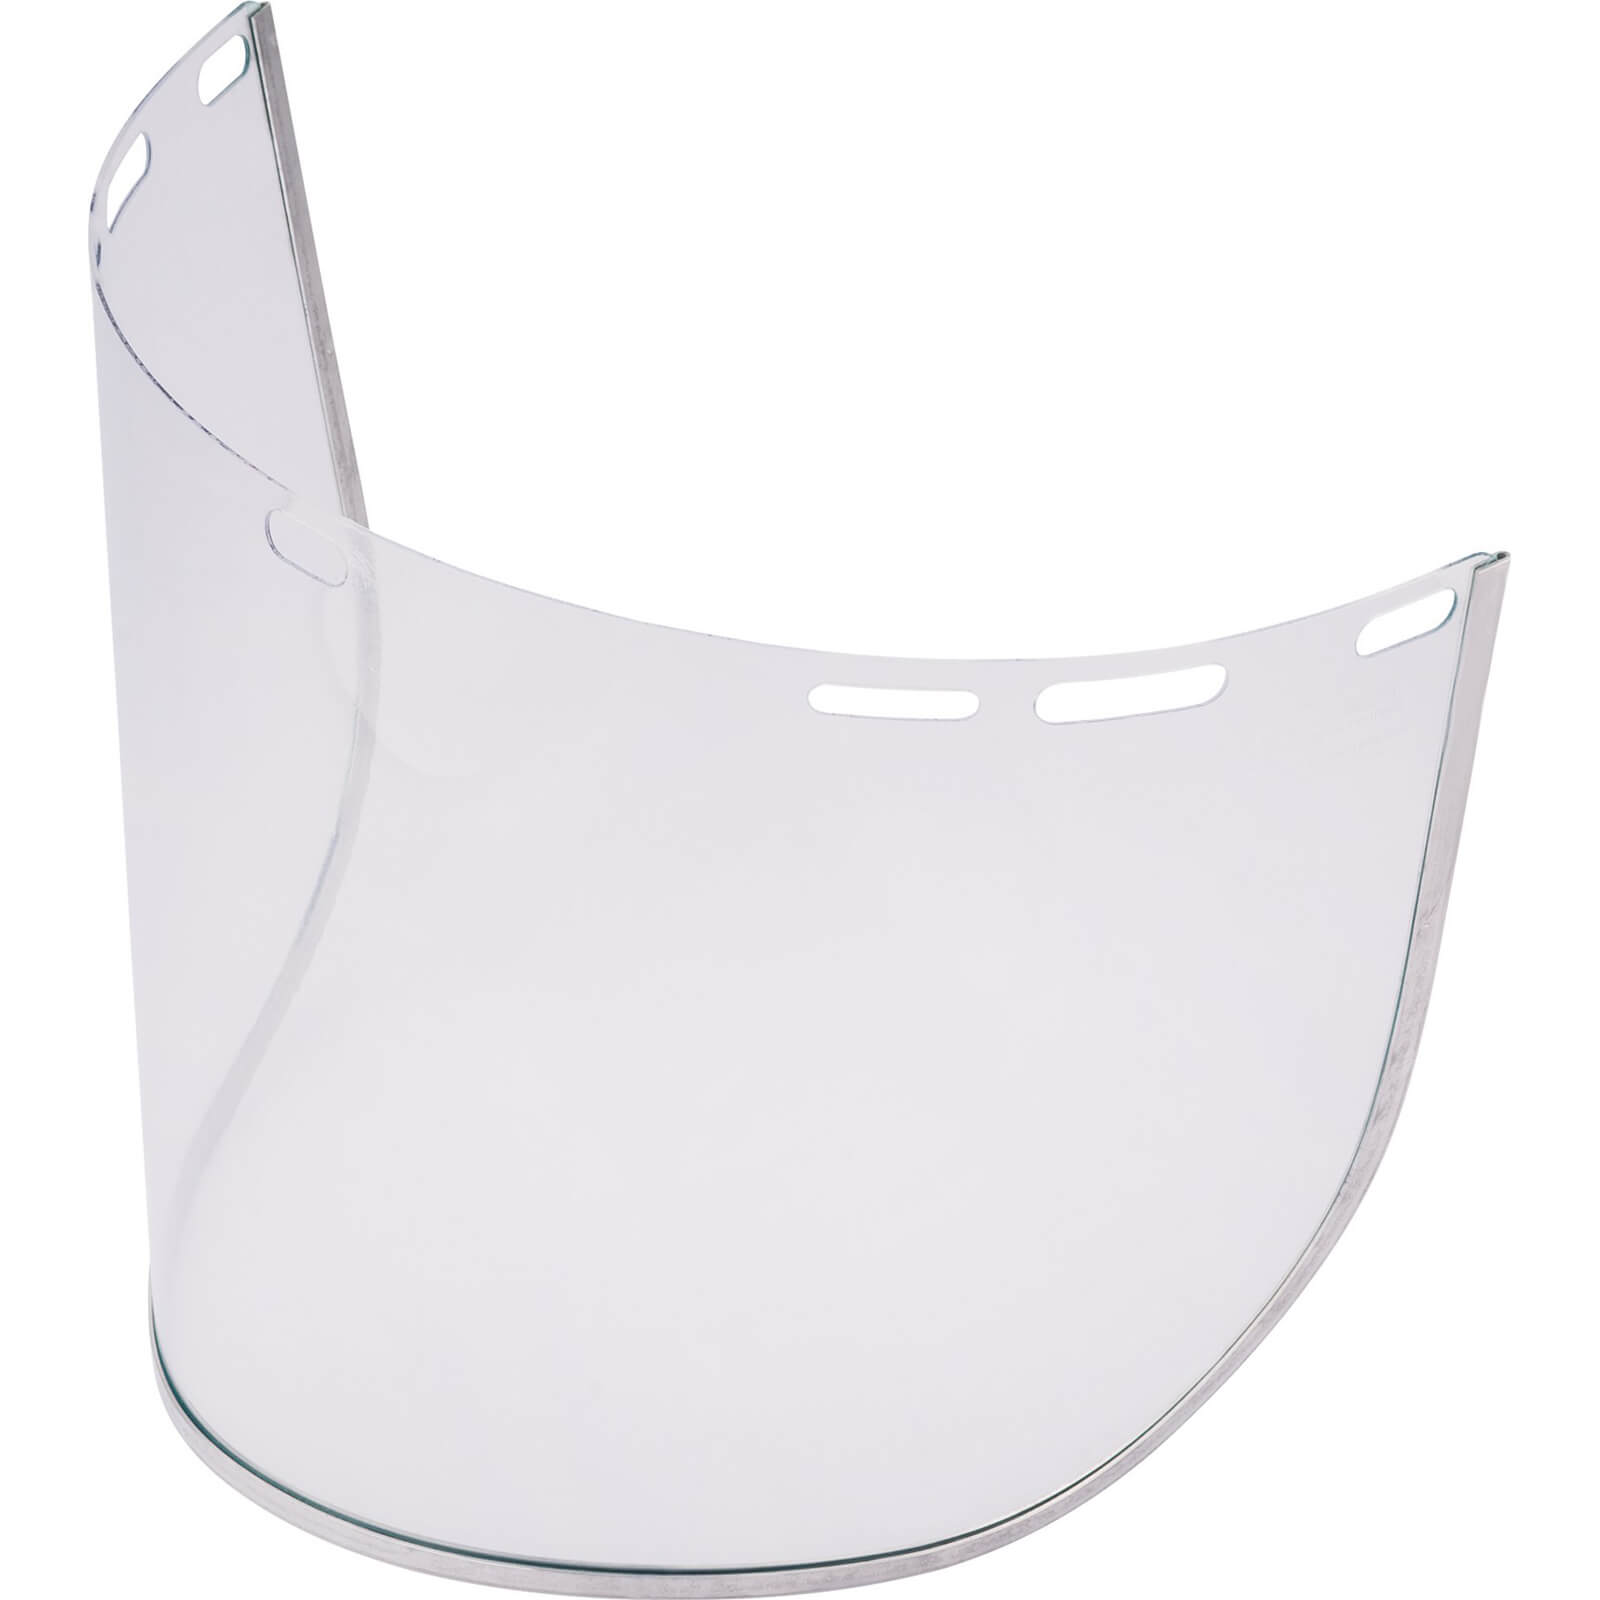 Image of Draper Clear Polycarbonate Visor for 82699 Face Shield